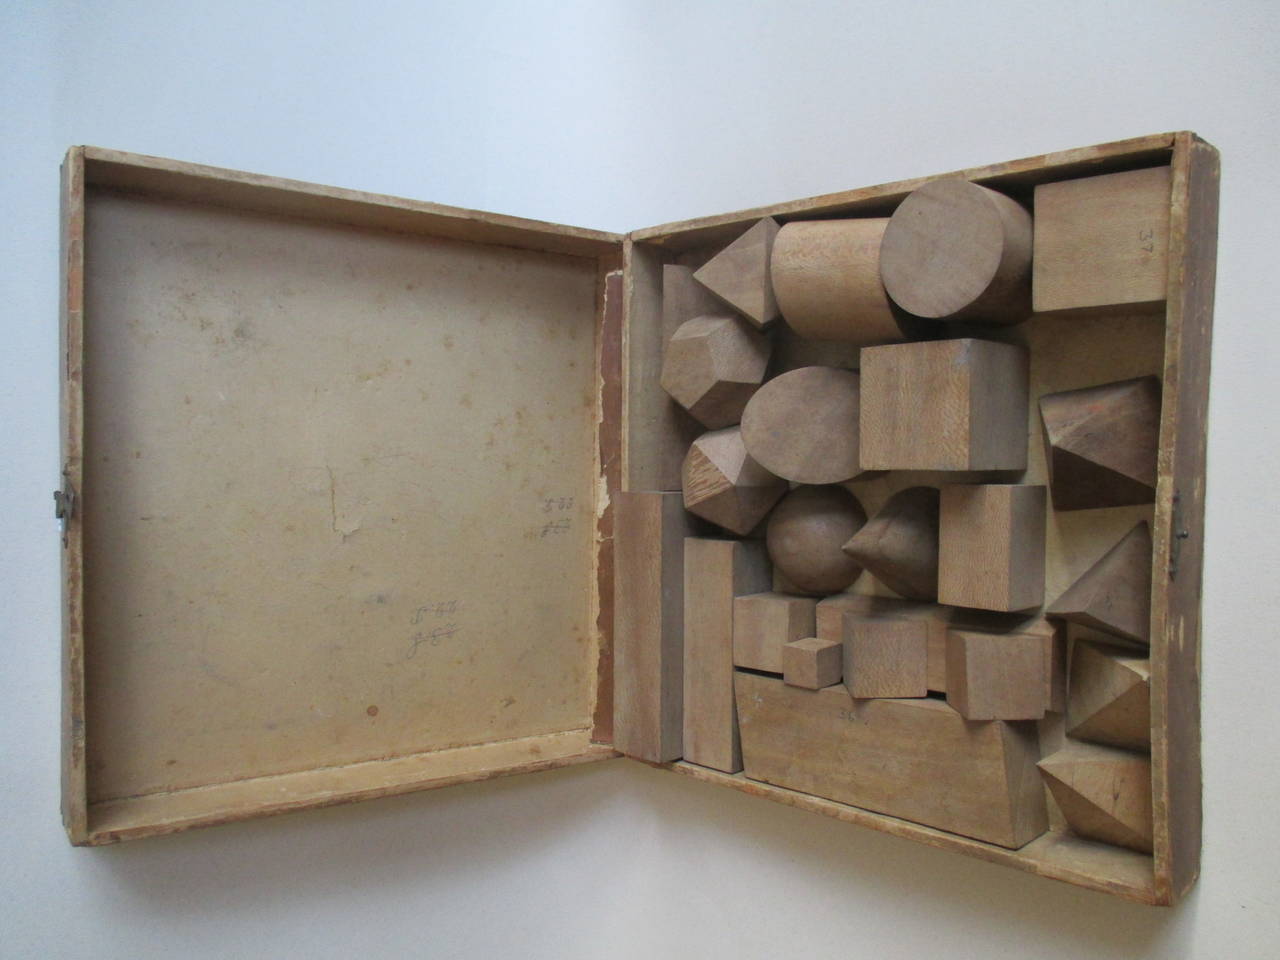 Complete box set with 23 geometric wood shapes by Faustino Palluzie.